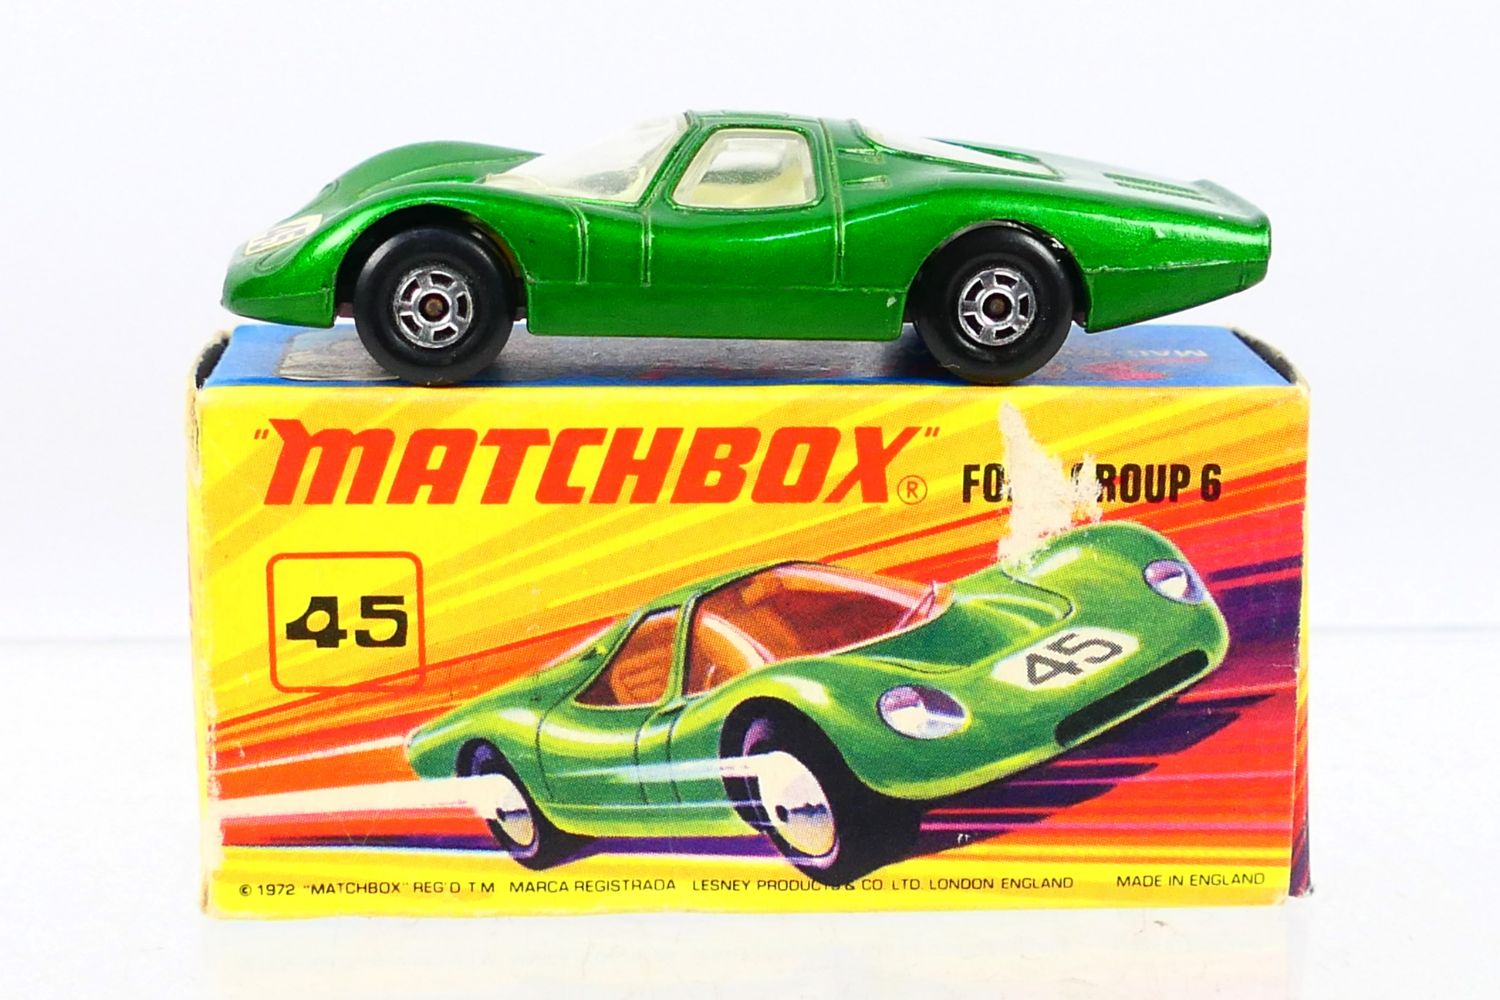 Sale of Vintage Toys and Models - British Toy Auctions